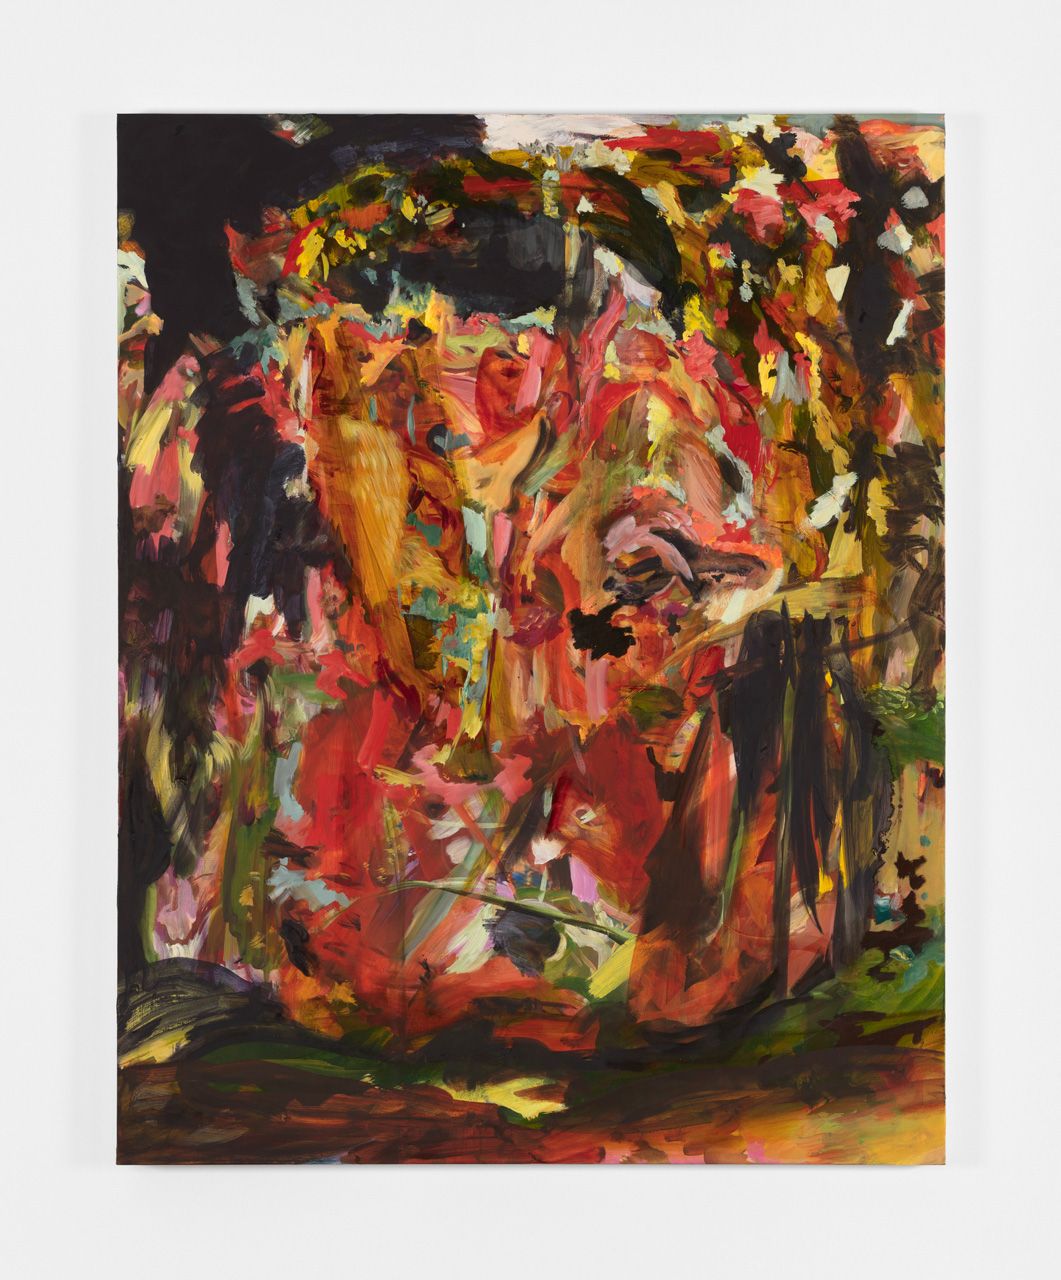 ICE AND FIRE: A BENEFIT EXHIBITION IN THREE PARTS | Cecily Brown